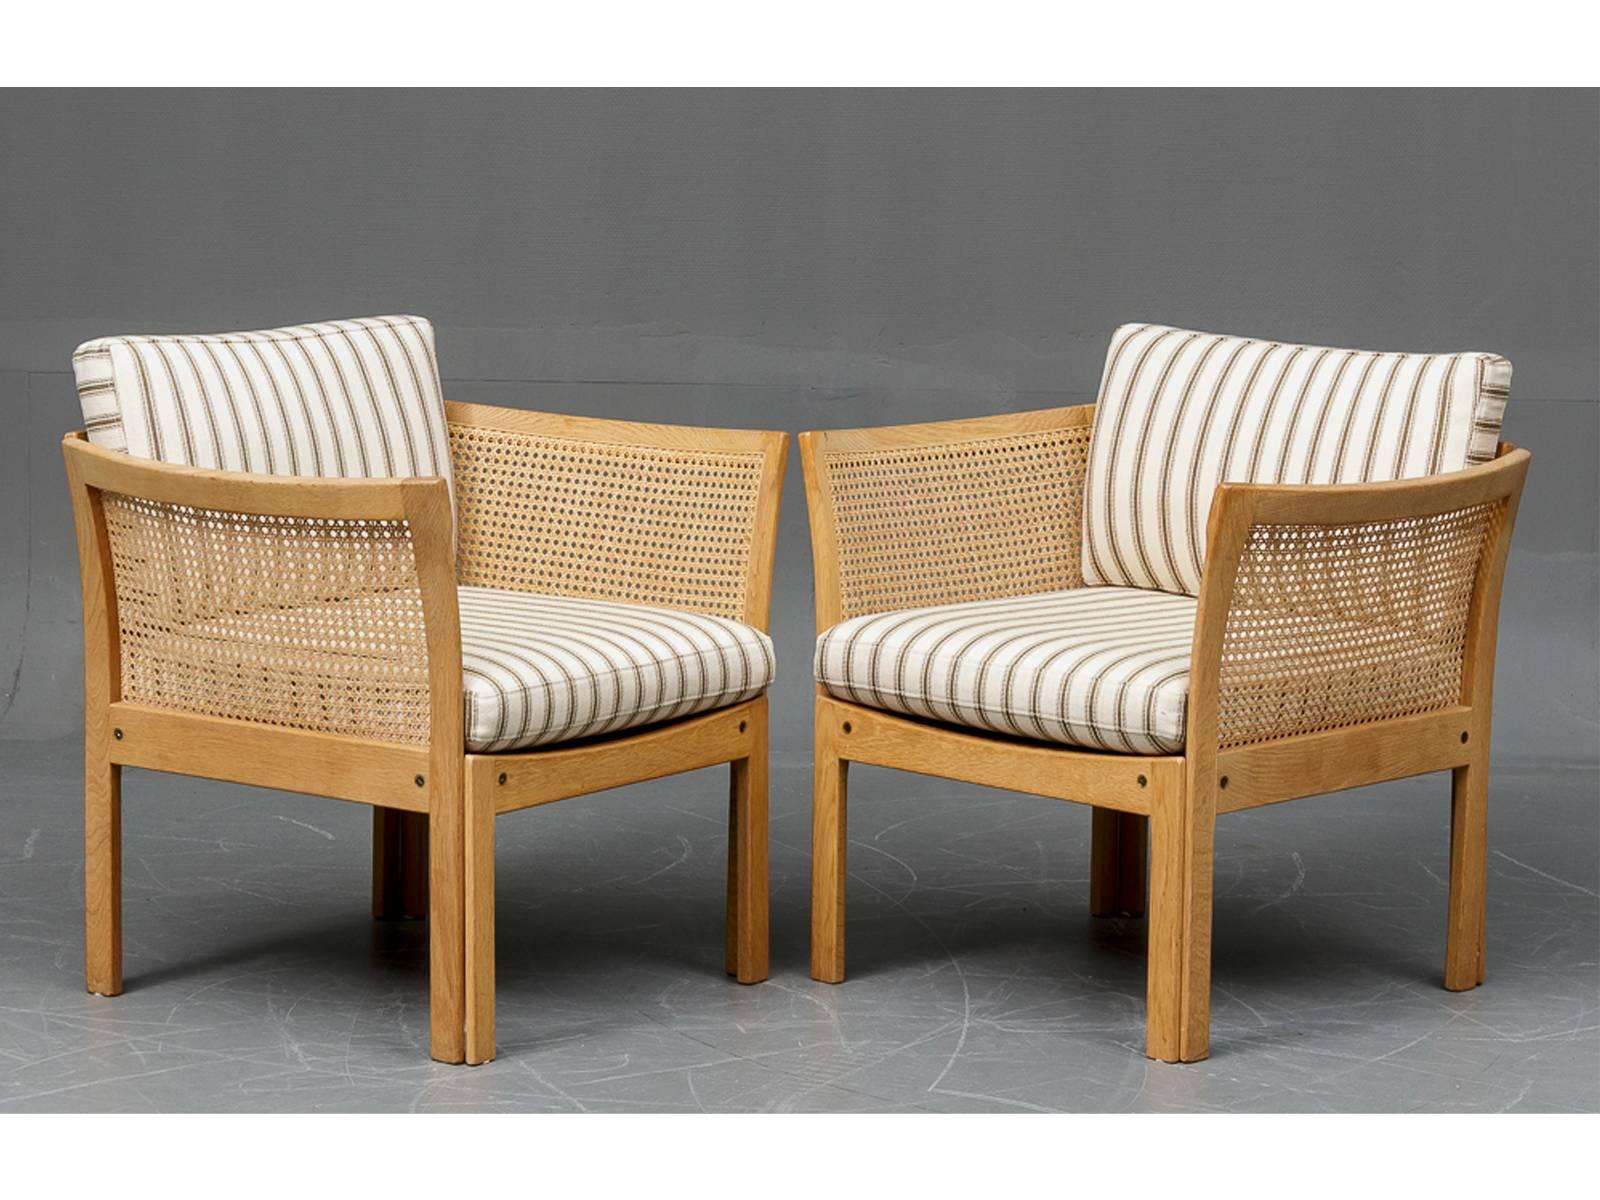 The Plexus easy chair was designed by Illum Wikkelsø in the late 1960s and produced in the 1970s by C. F. Christensen Silkeborg

The chair features oak frame with rattan armrests and cushions all in very good condition.

If you wish to have the